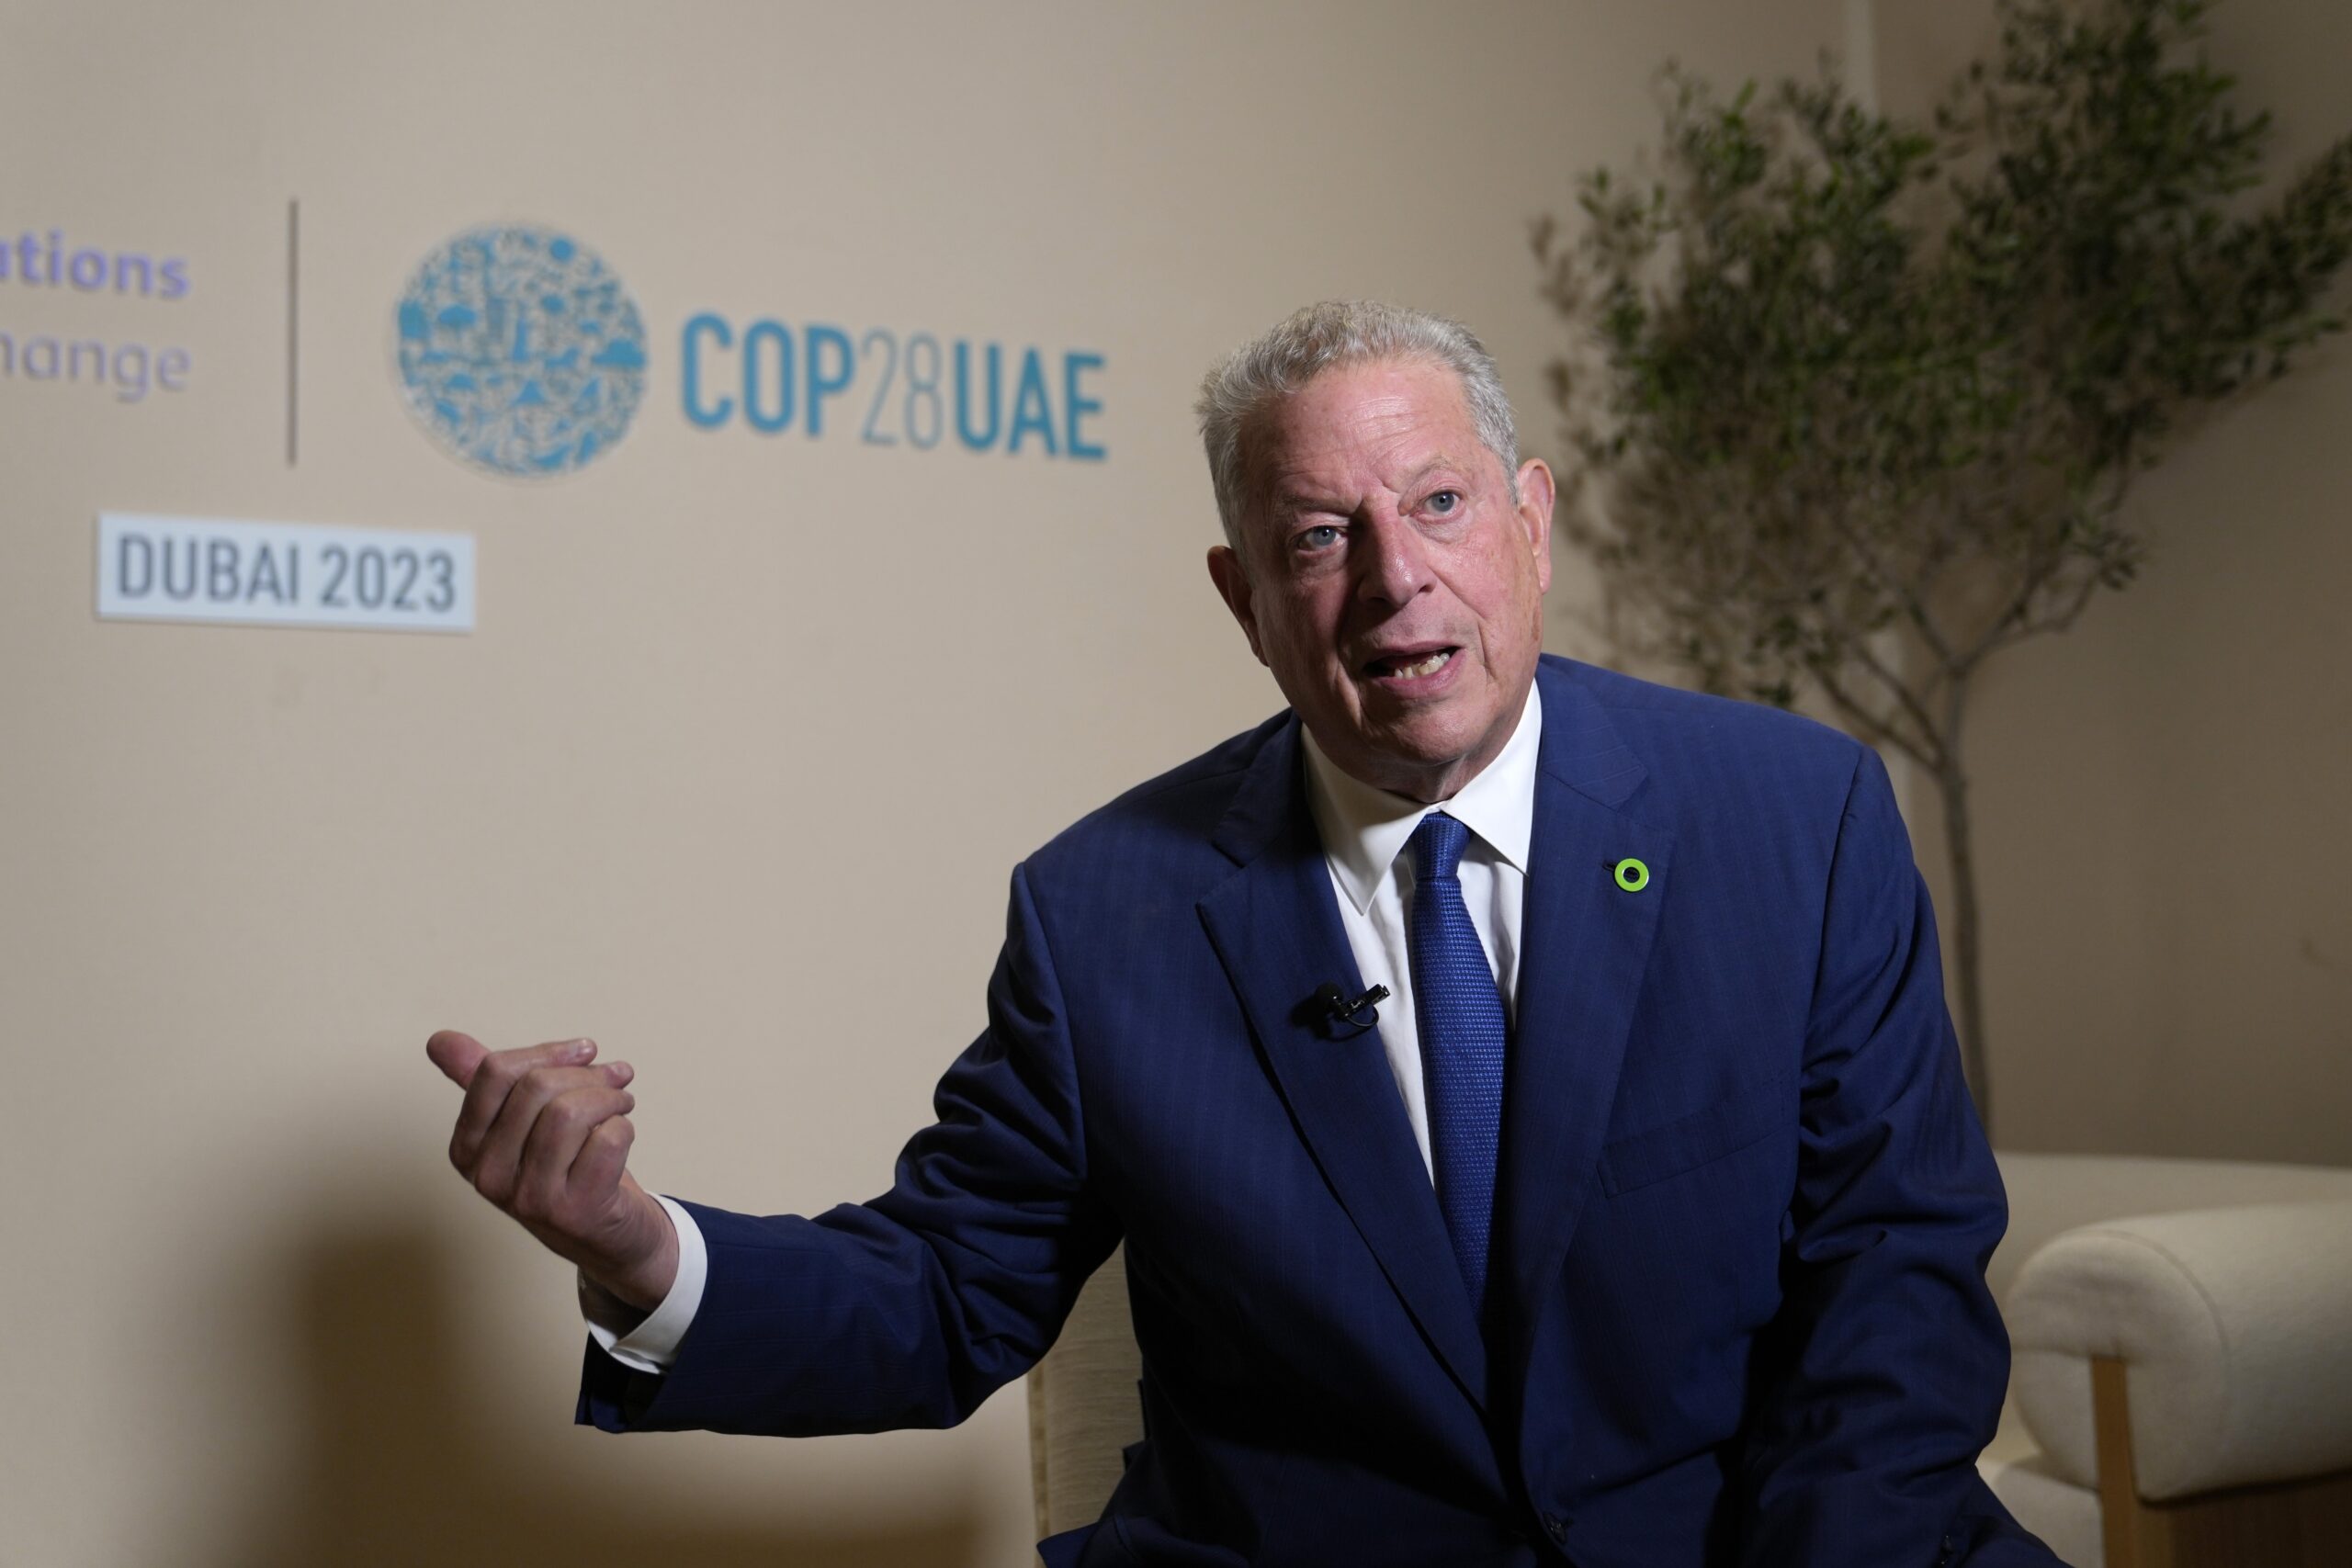 ‘We can reclaim control of our destiny,’ Al Gore says of climate change